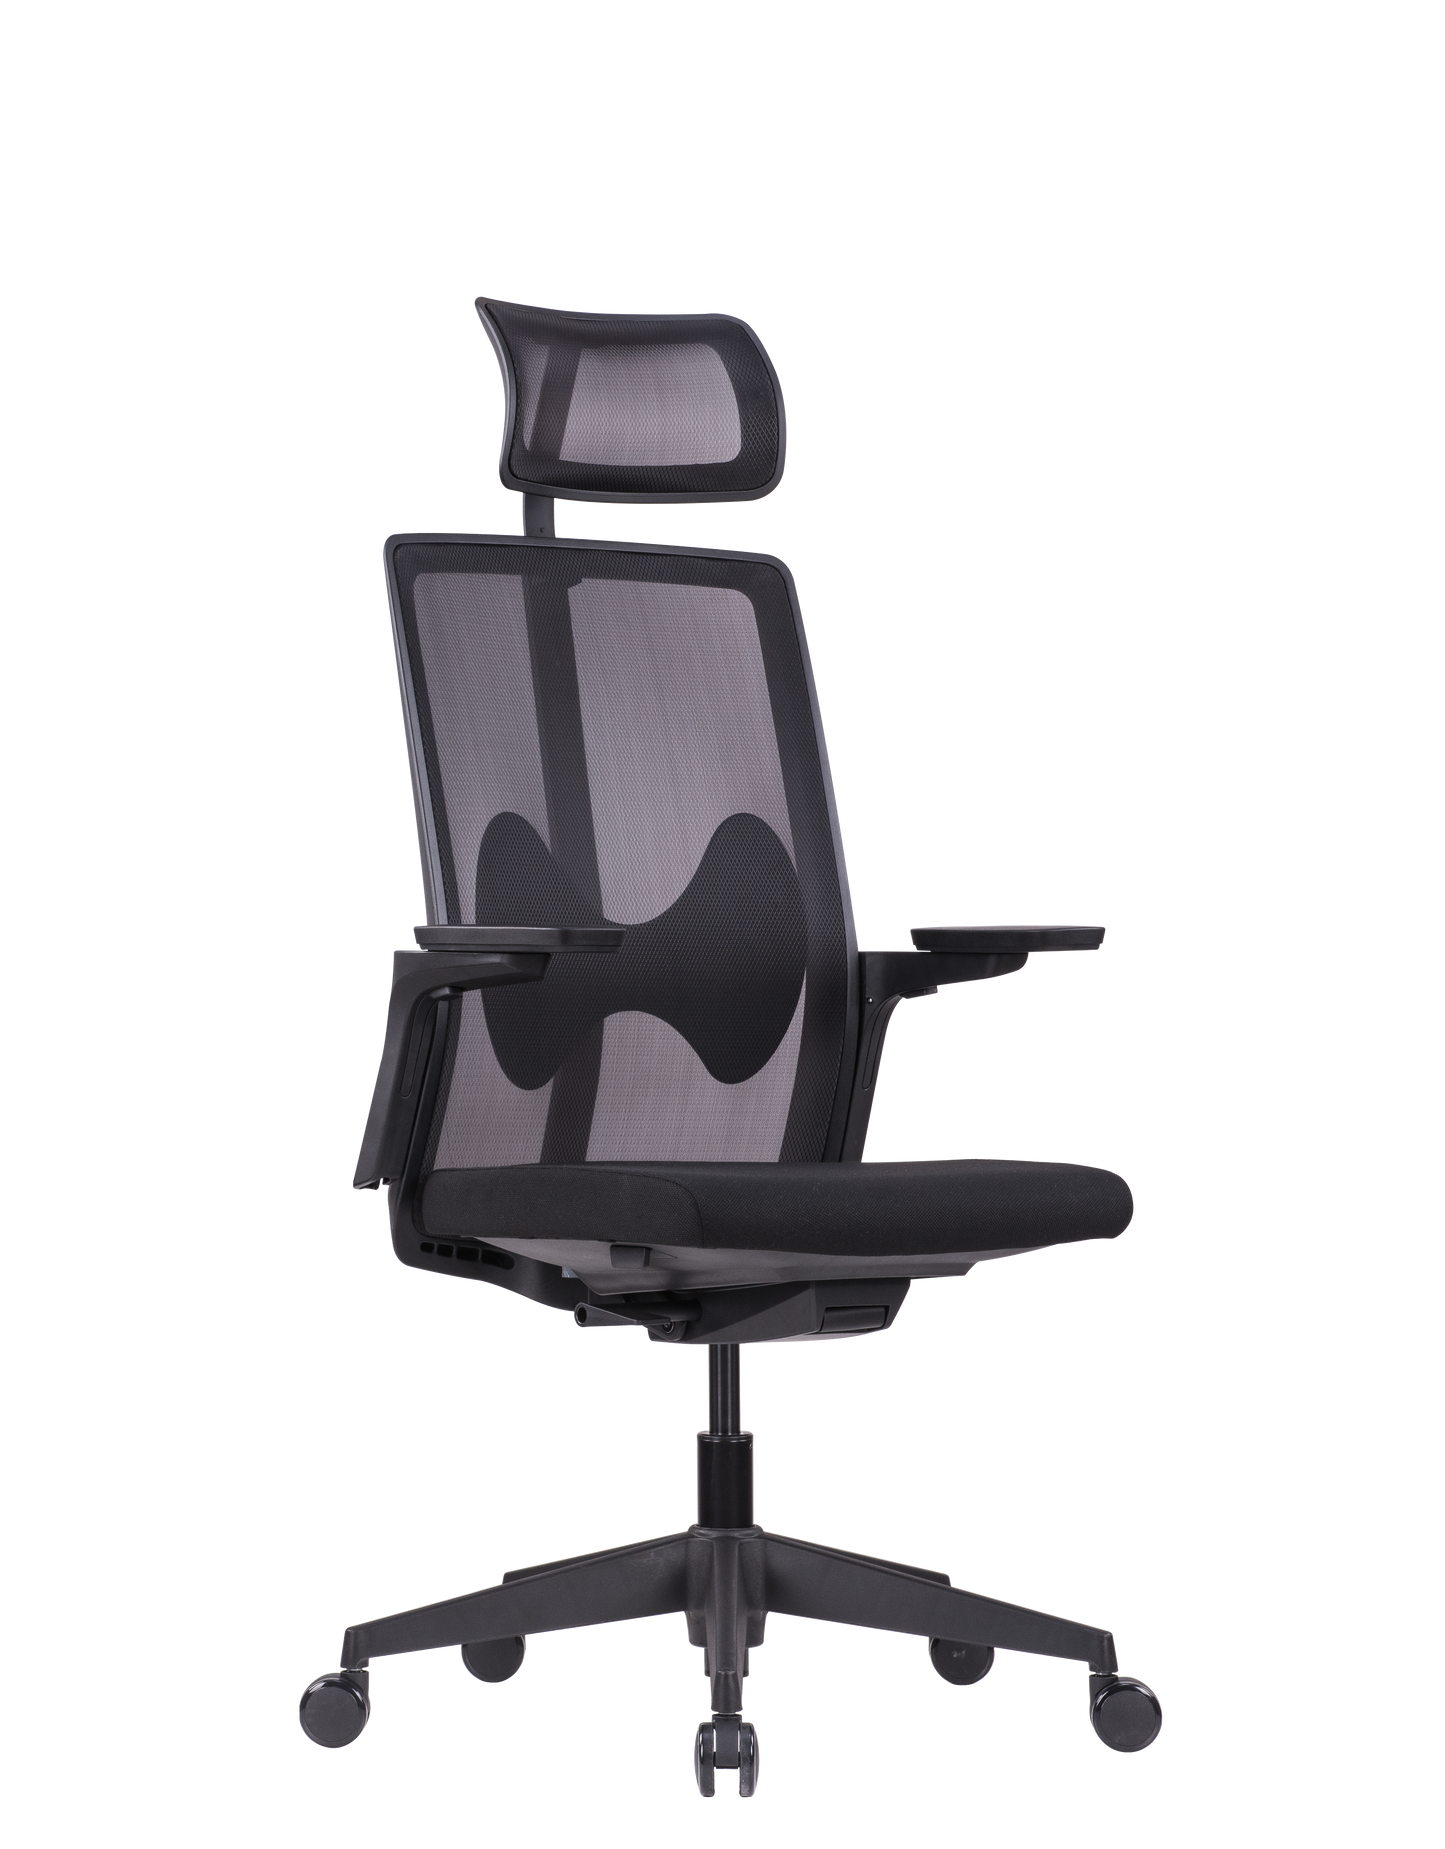 K13 Butterfly-8 Office Ergonomic Chair - With lumbar